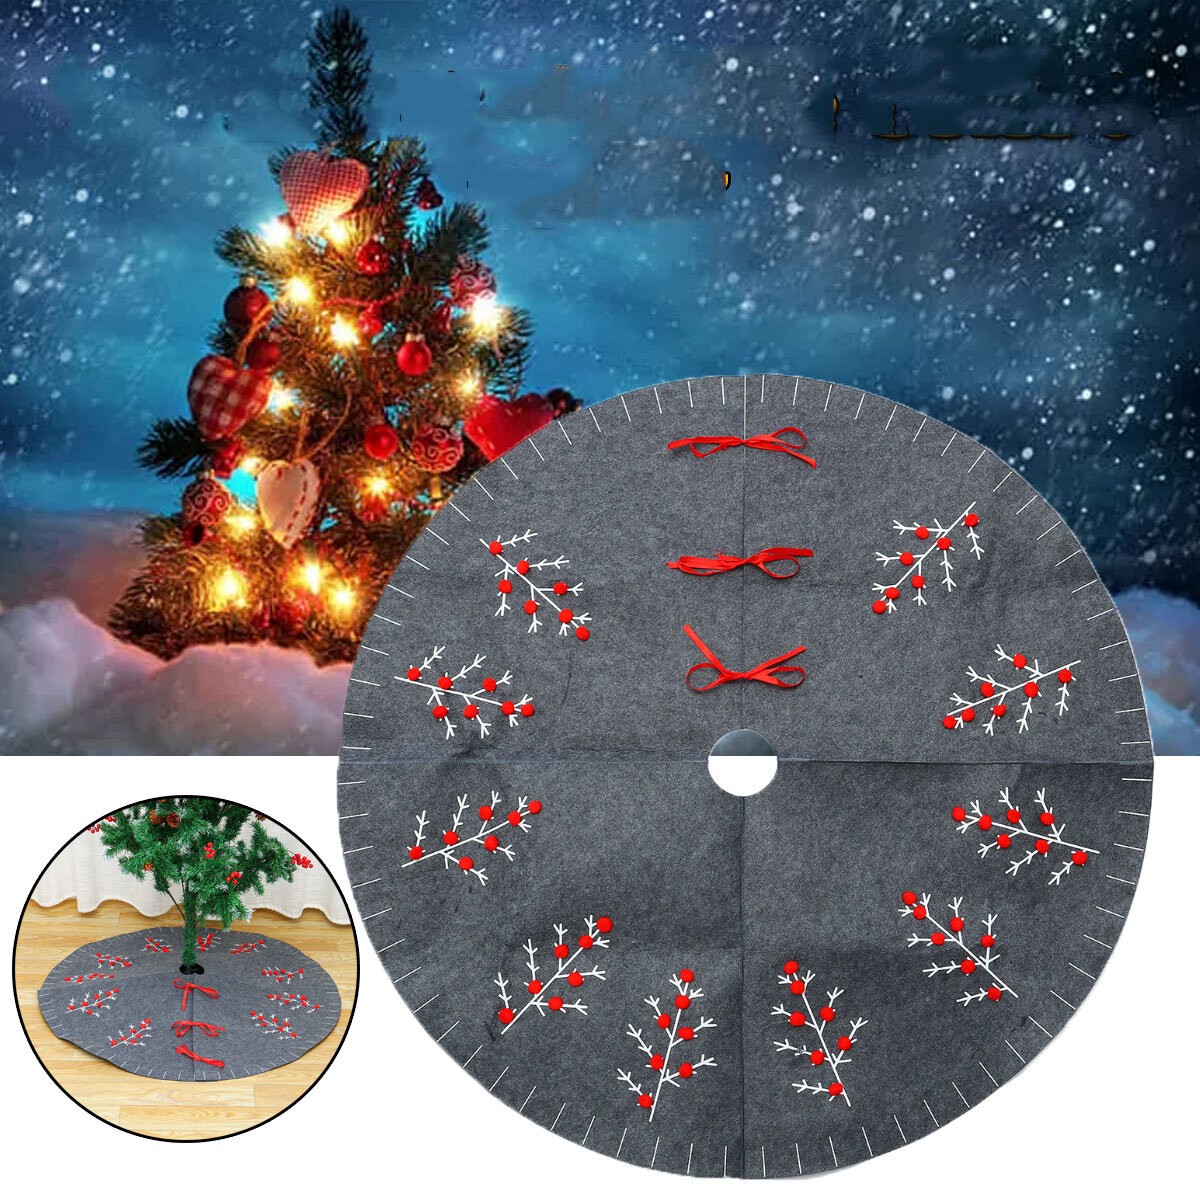 2020 Christmas Decor 120cm New Year Xmas Tree Carpet Foot Cover Christmas Tree Skirt Aprons for Home Decoration